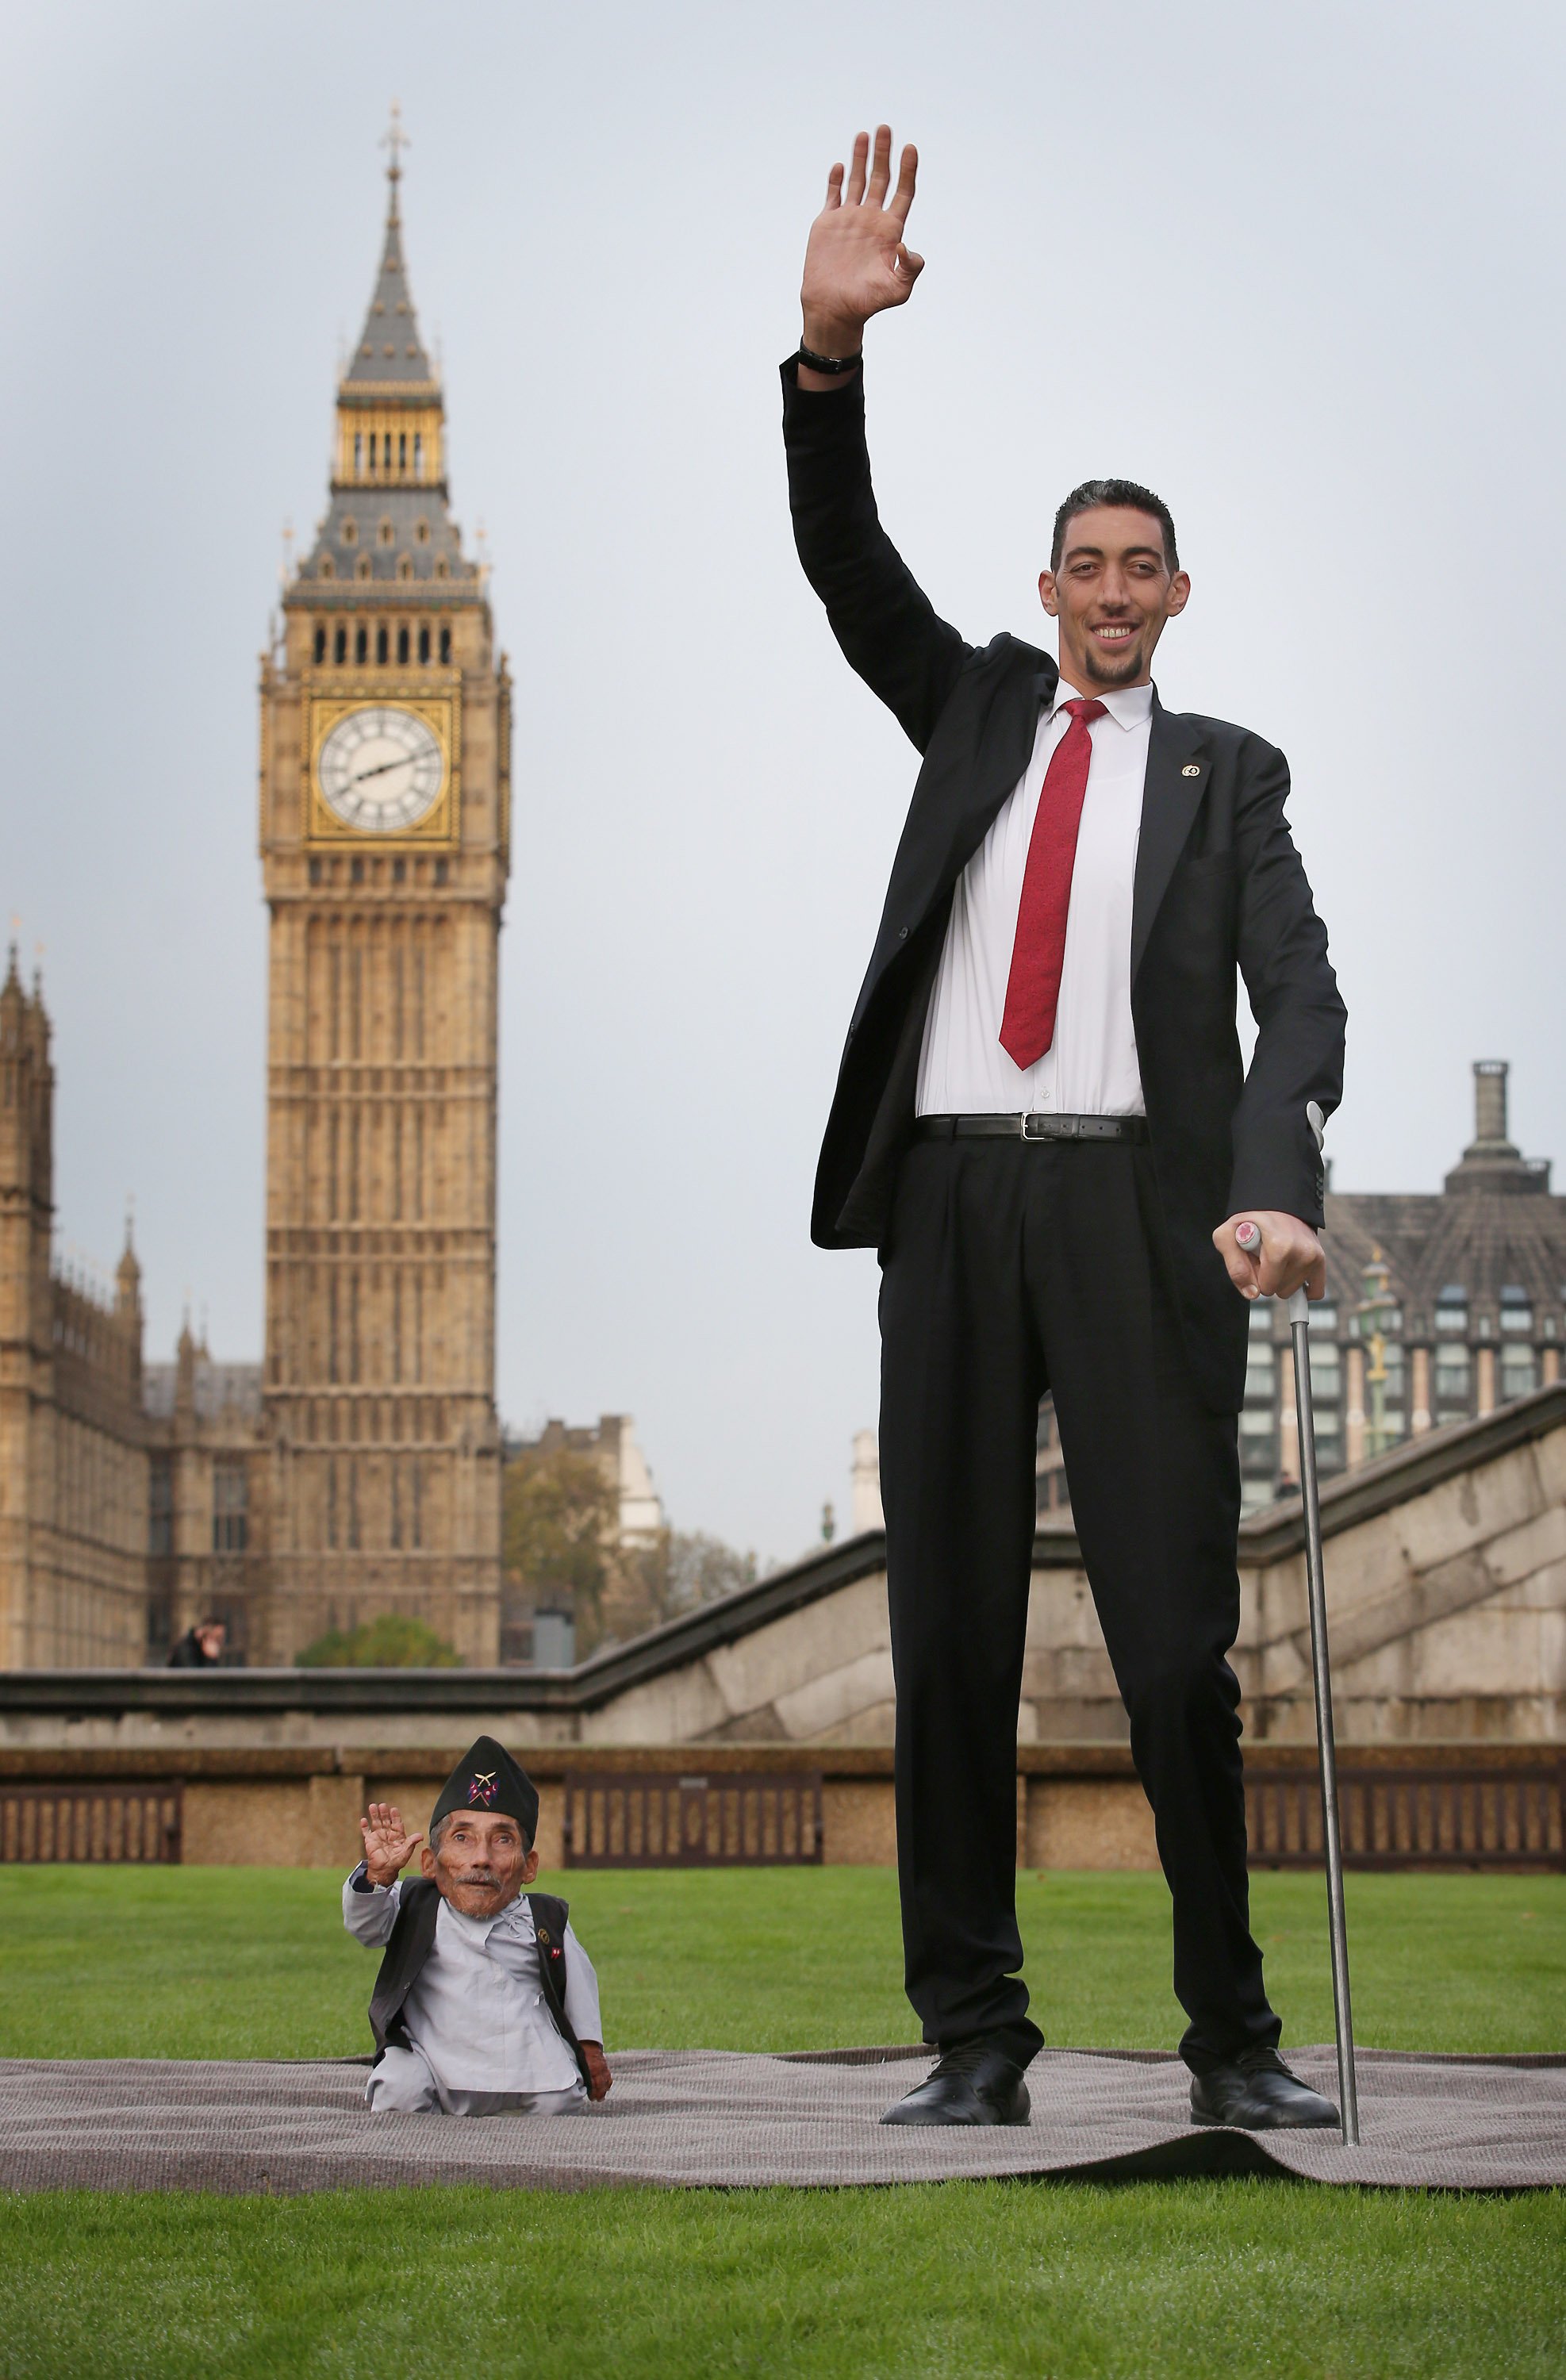 The shortest man ever, Chandra Bahadur Dangi meets the worlds tallest man, Sultan Kosen for the very first time on November 13, 2014 in London, England. | Source: Getty Images